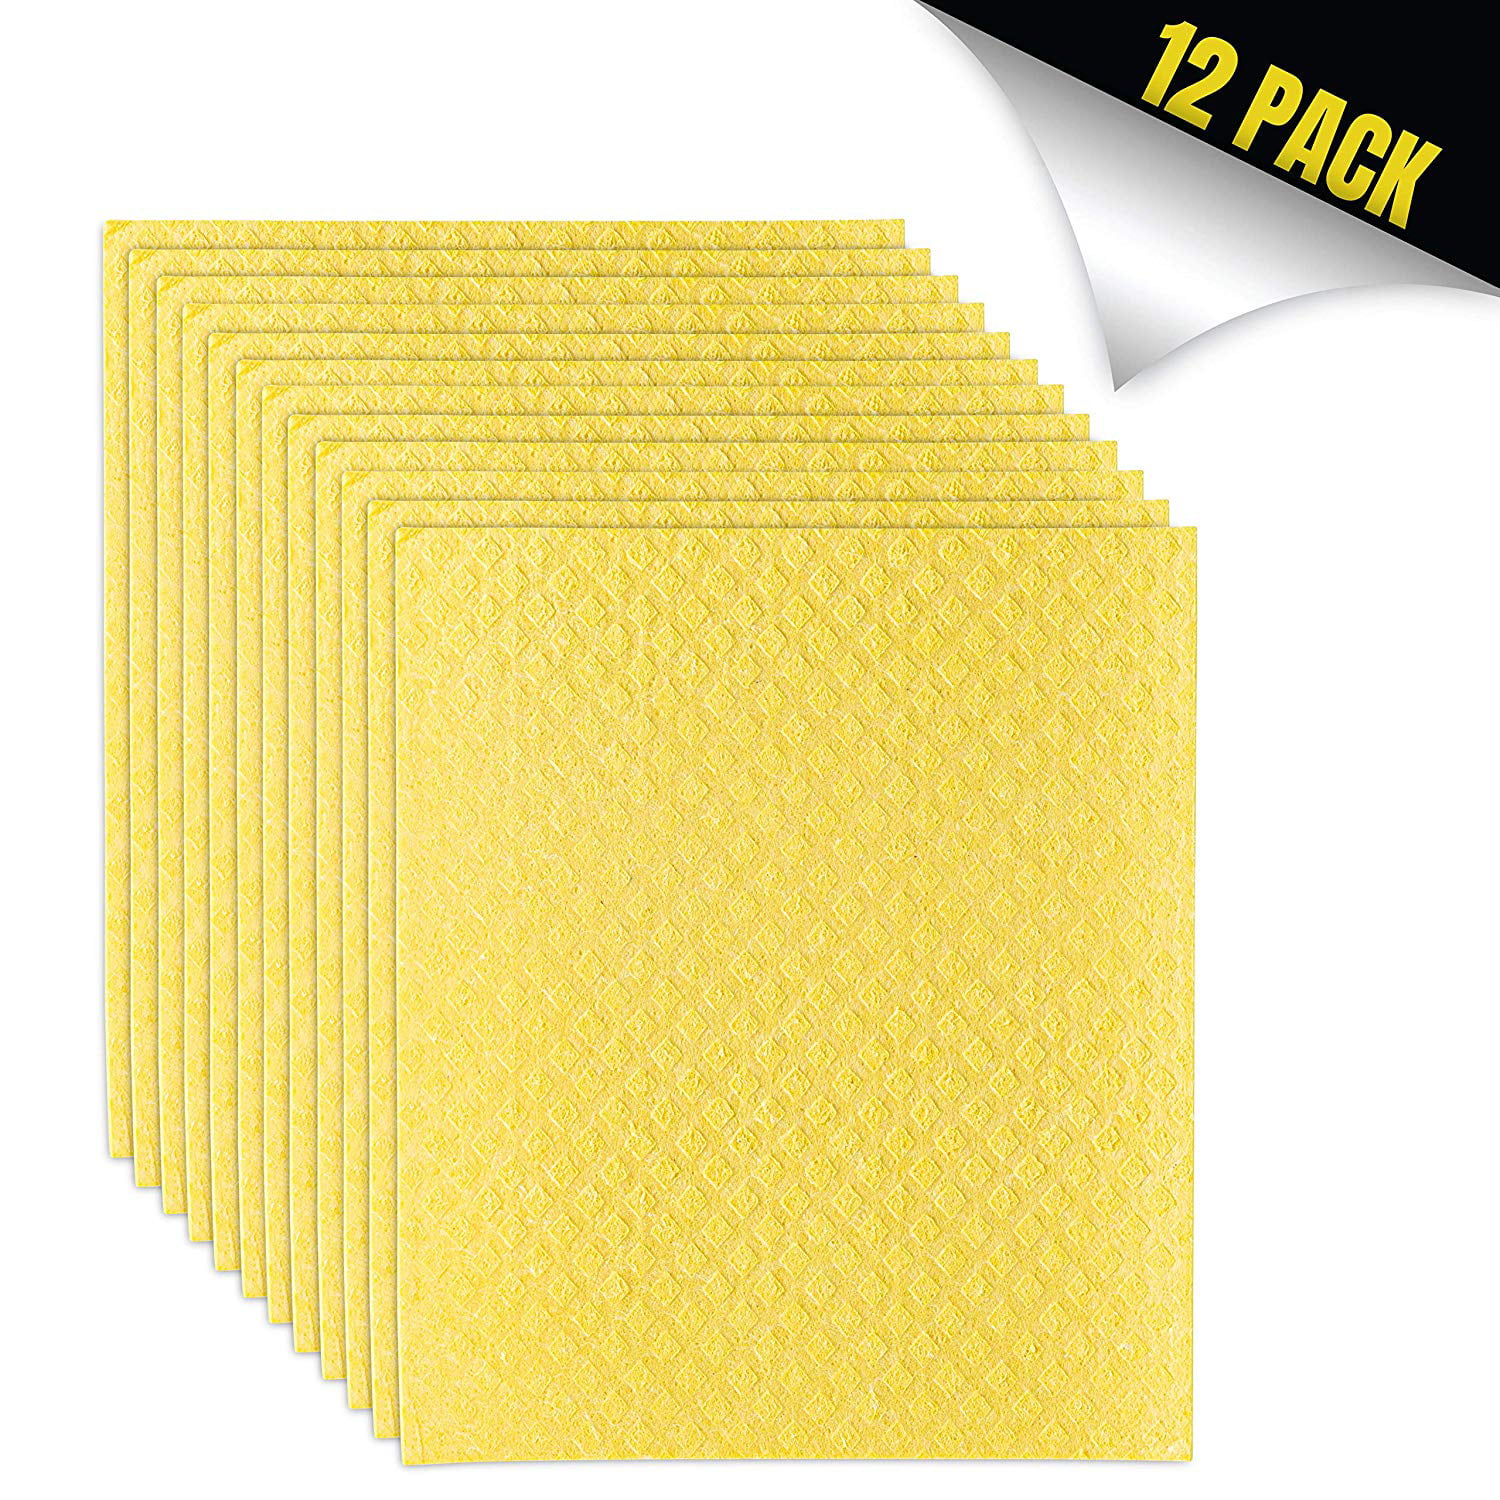 Swedish Dishcloths are just $12 at  today